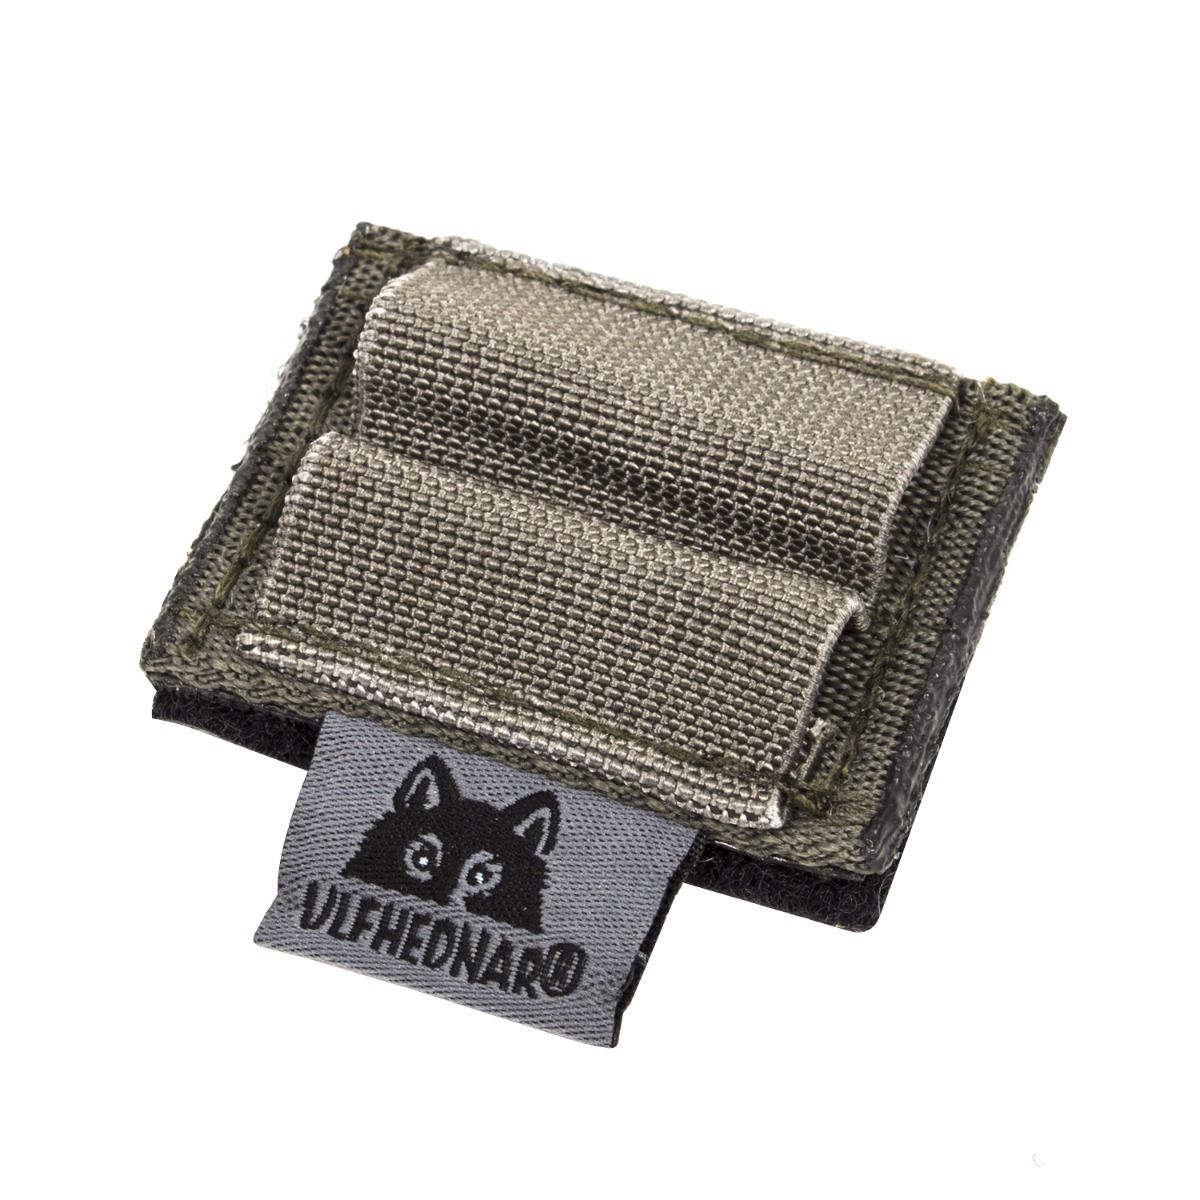 Ulfhednar PRS Extra Two Round Holder #UH215 - Australian Tactical Precision